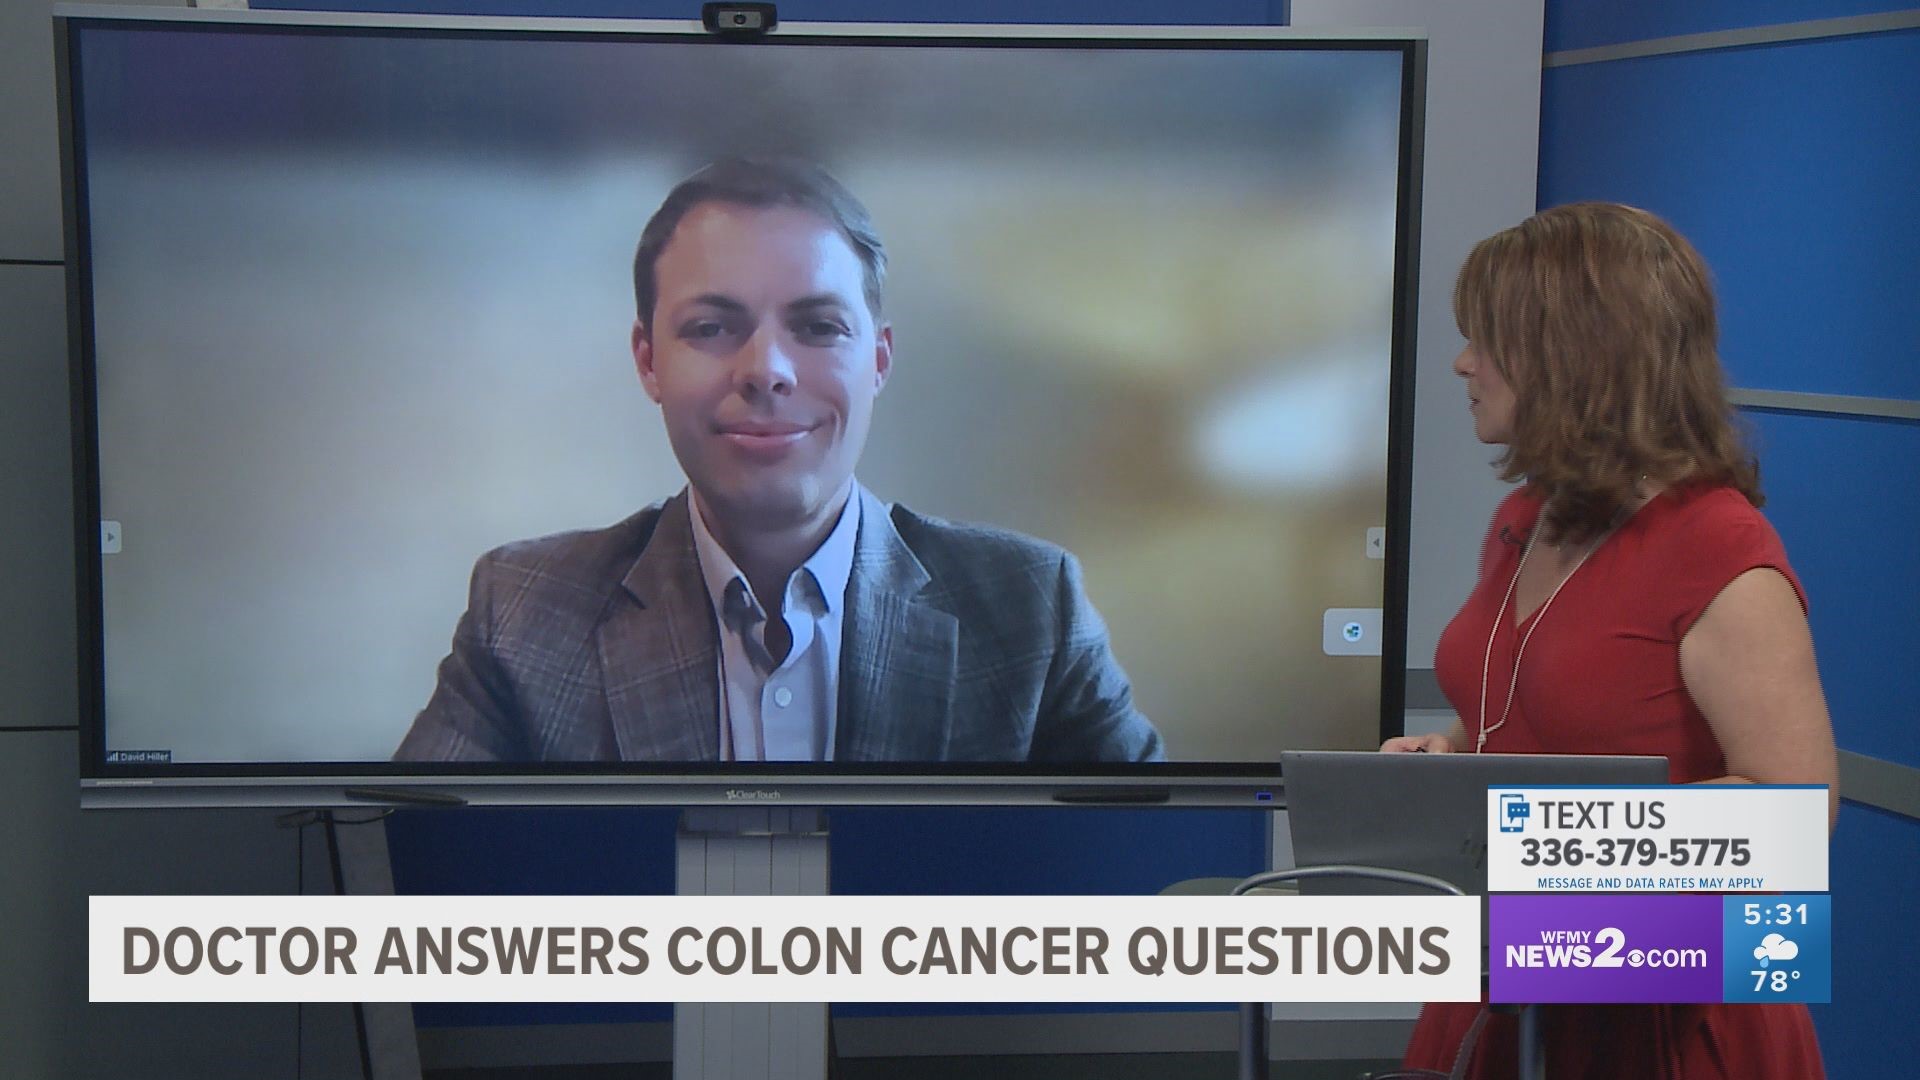 Colon cancer can impact anyone. It’s important to get your colonoscopy when eligible.